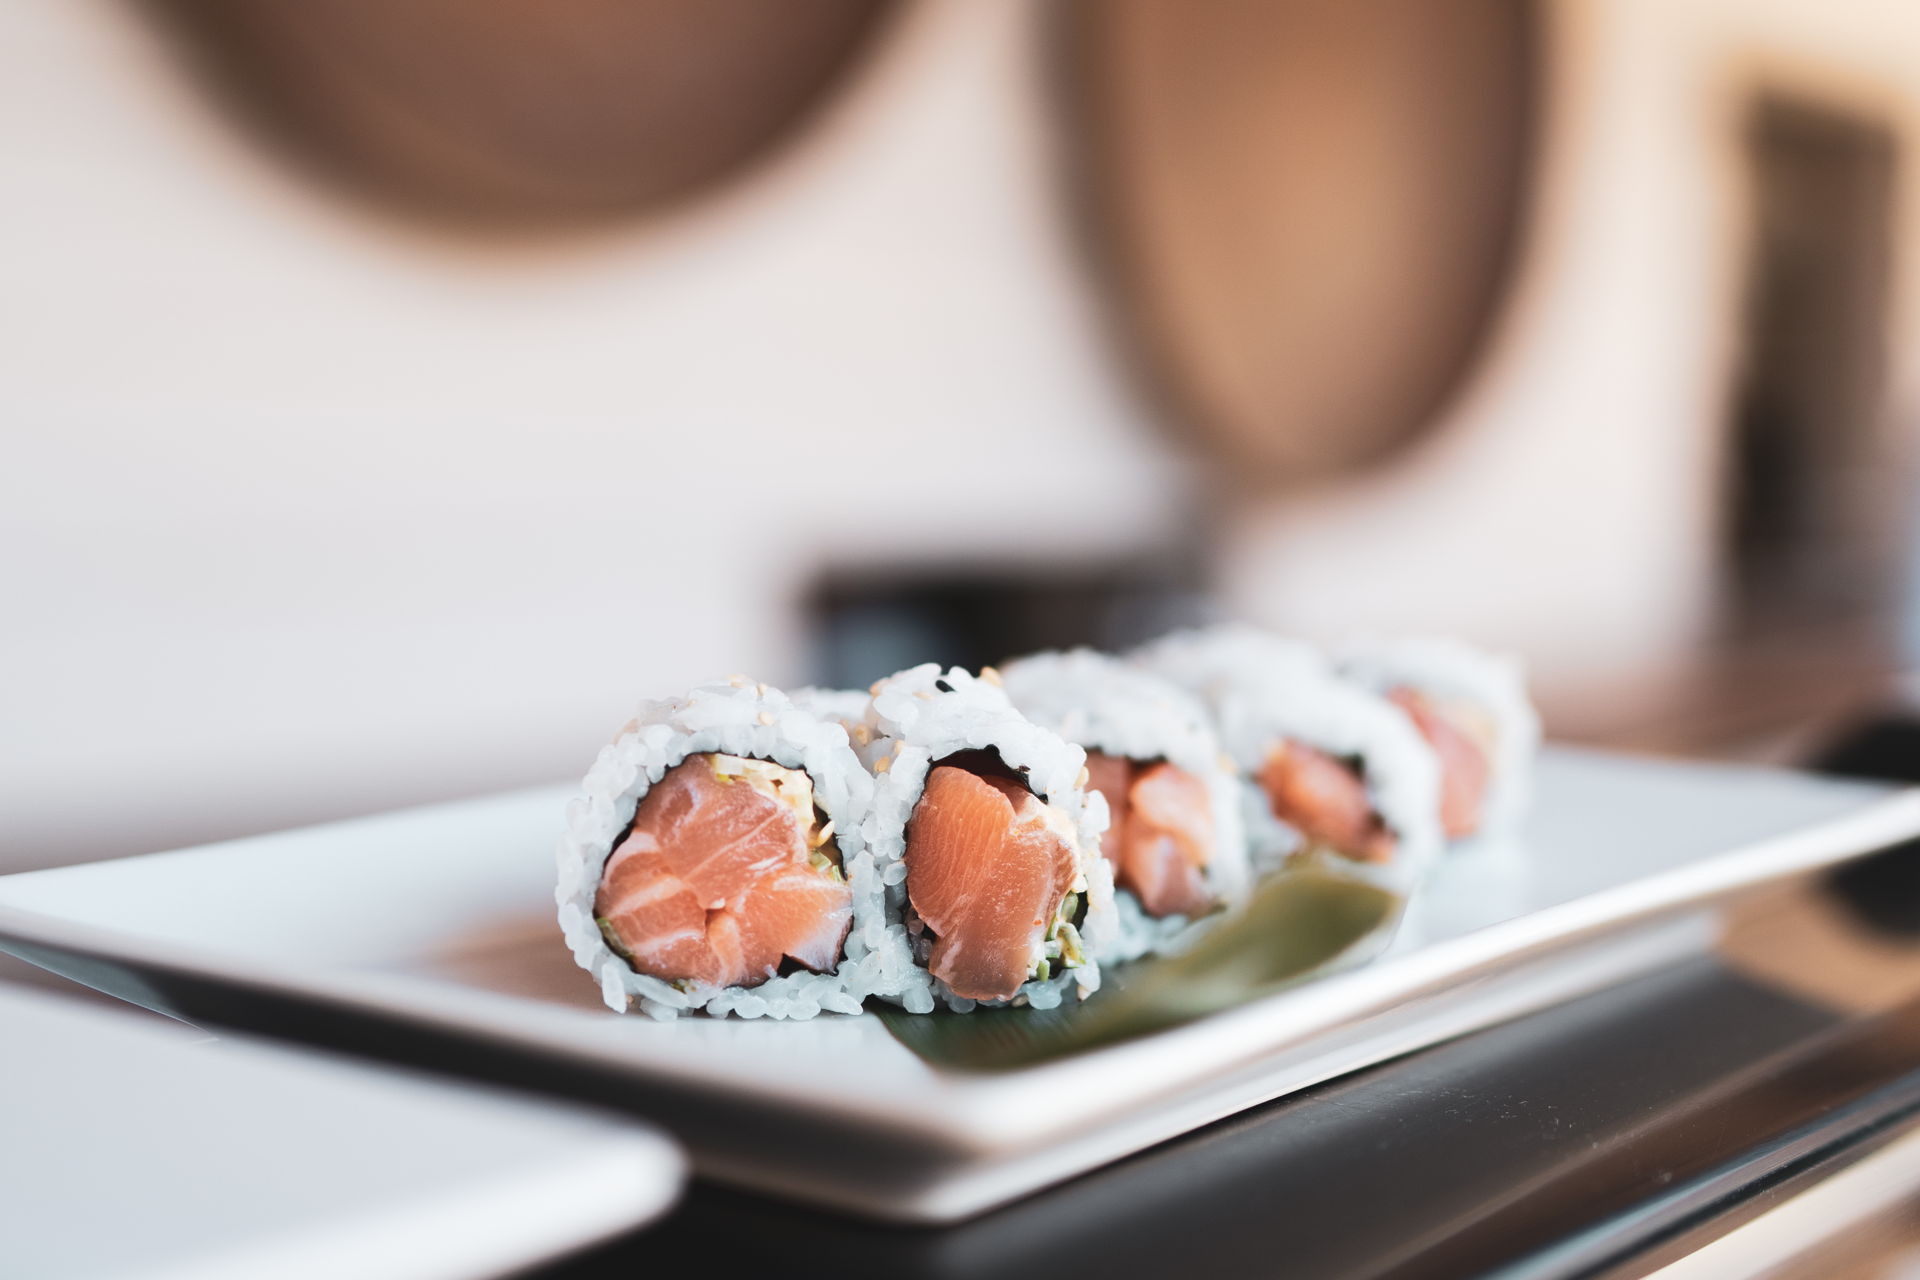 If you’re in a sushi mood. Mykonos offers everything!